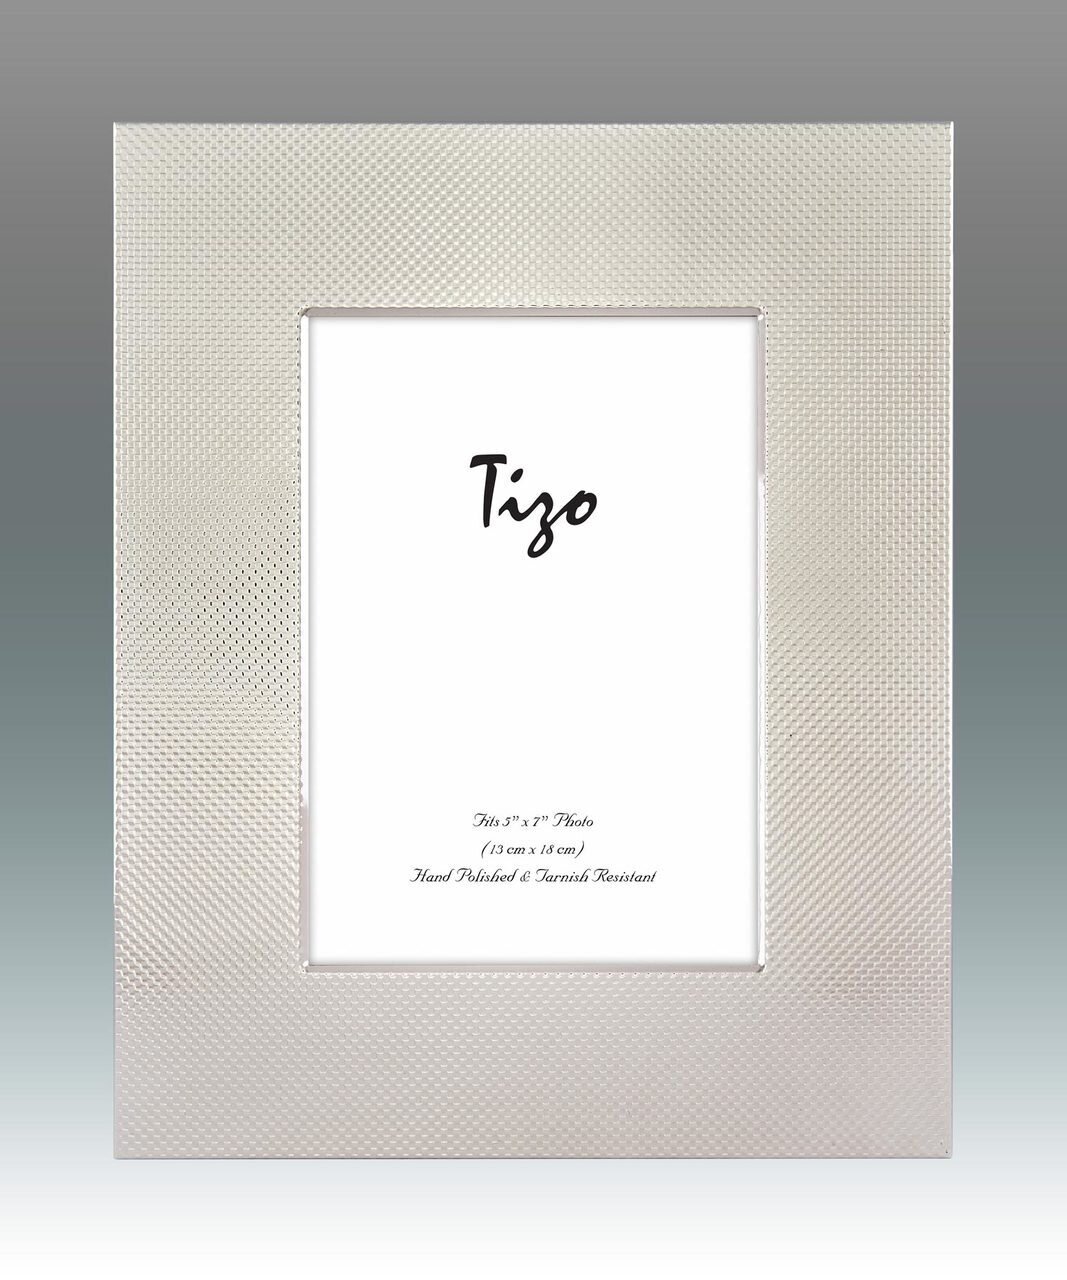 Tizo Empire of Dots Silver-plated Picture Frame 4 x 6 Inch